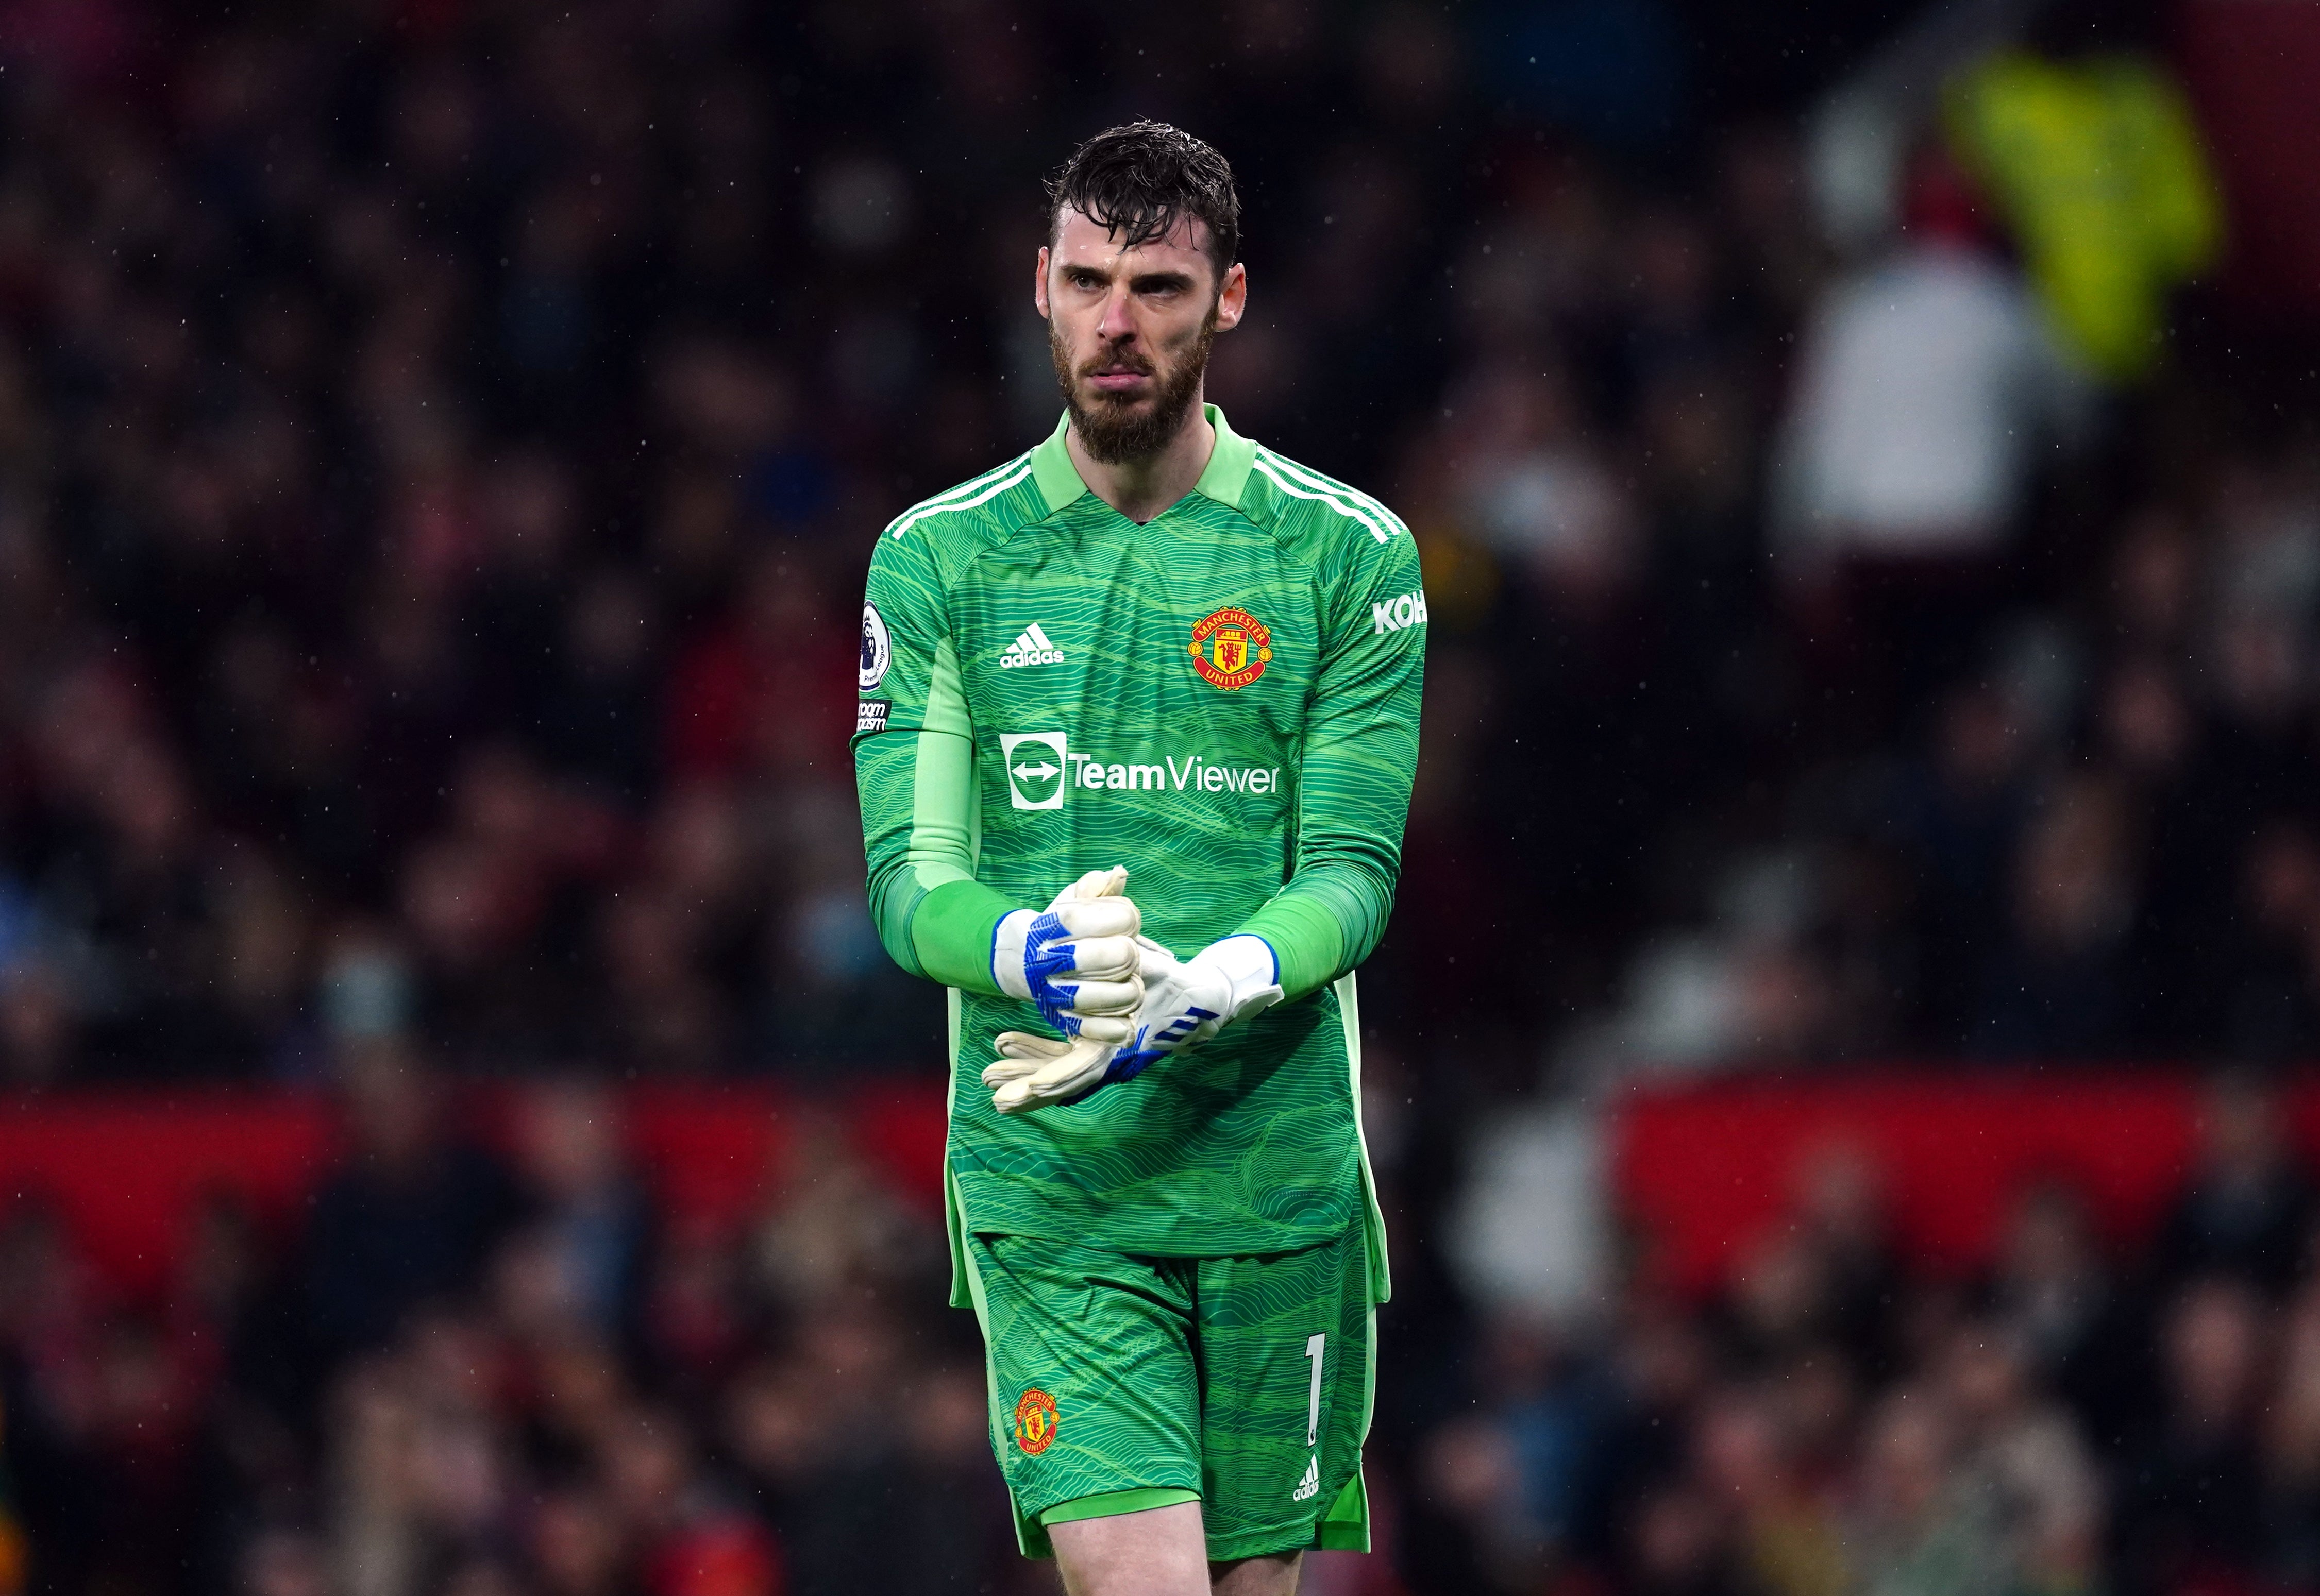 David De Gea wants Manchester United to end a season to forget with a win (Martin Rickett/PA).